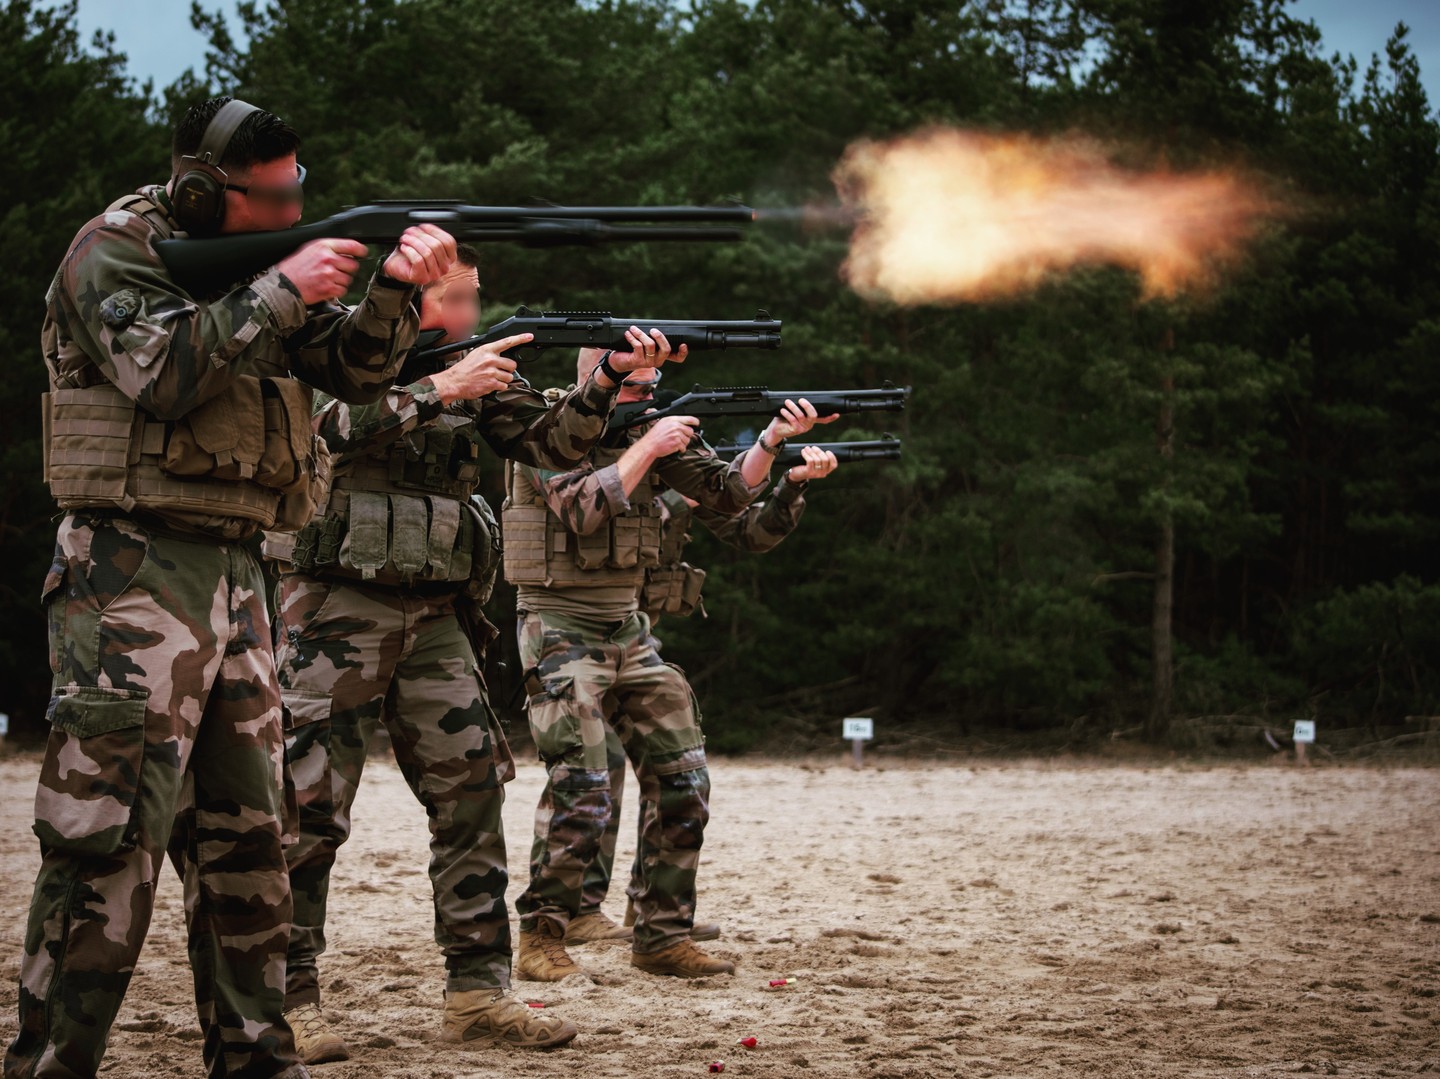 French soldiers training with SuperNova shotguns